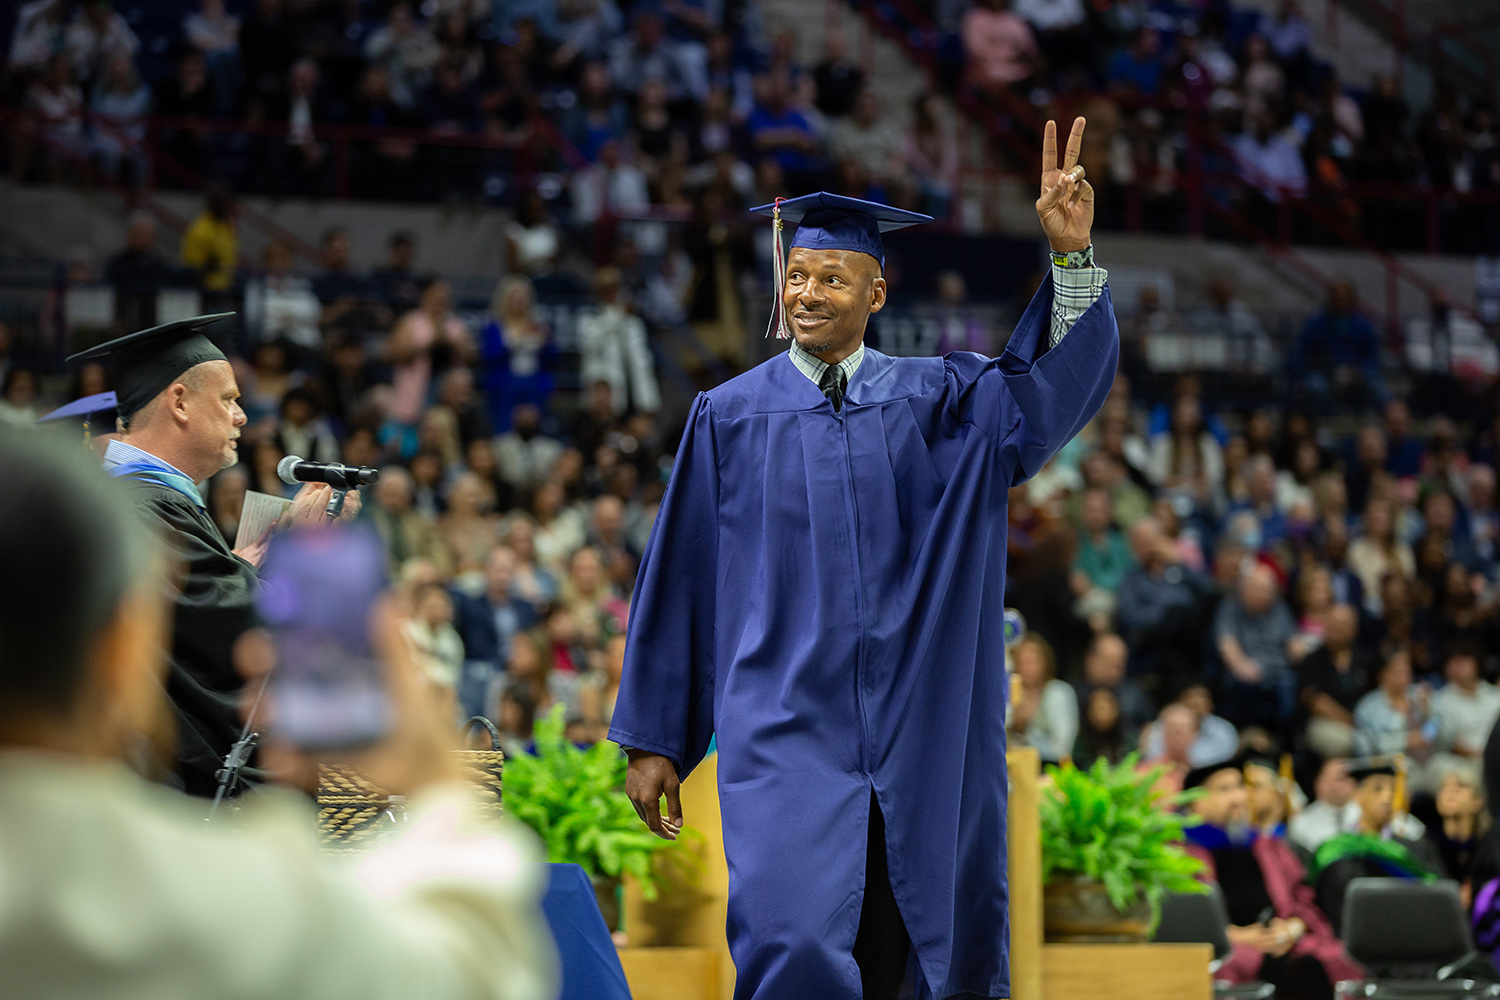 Ray Allen gives peace sign while walking across floor during commencement.